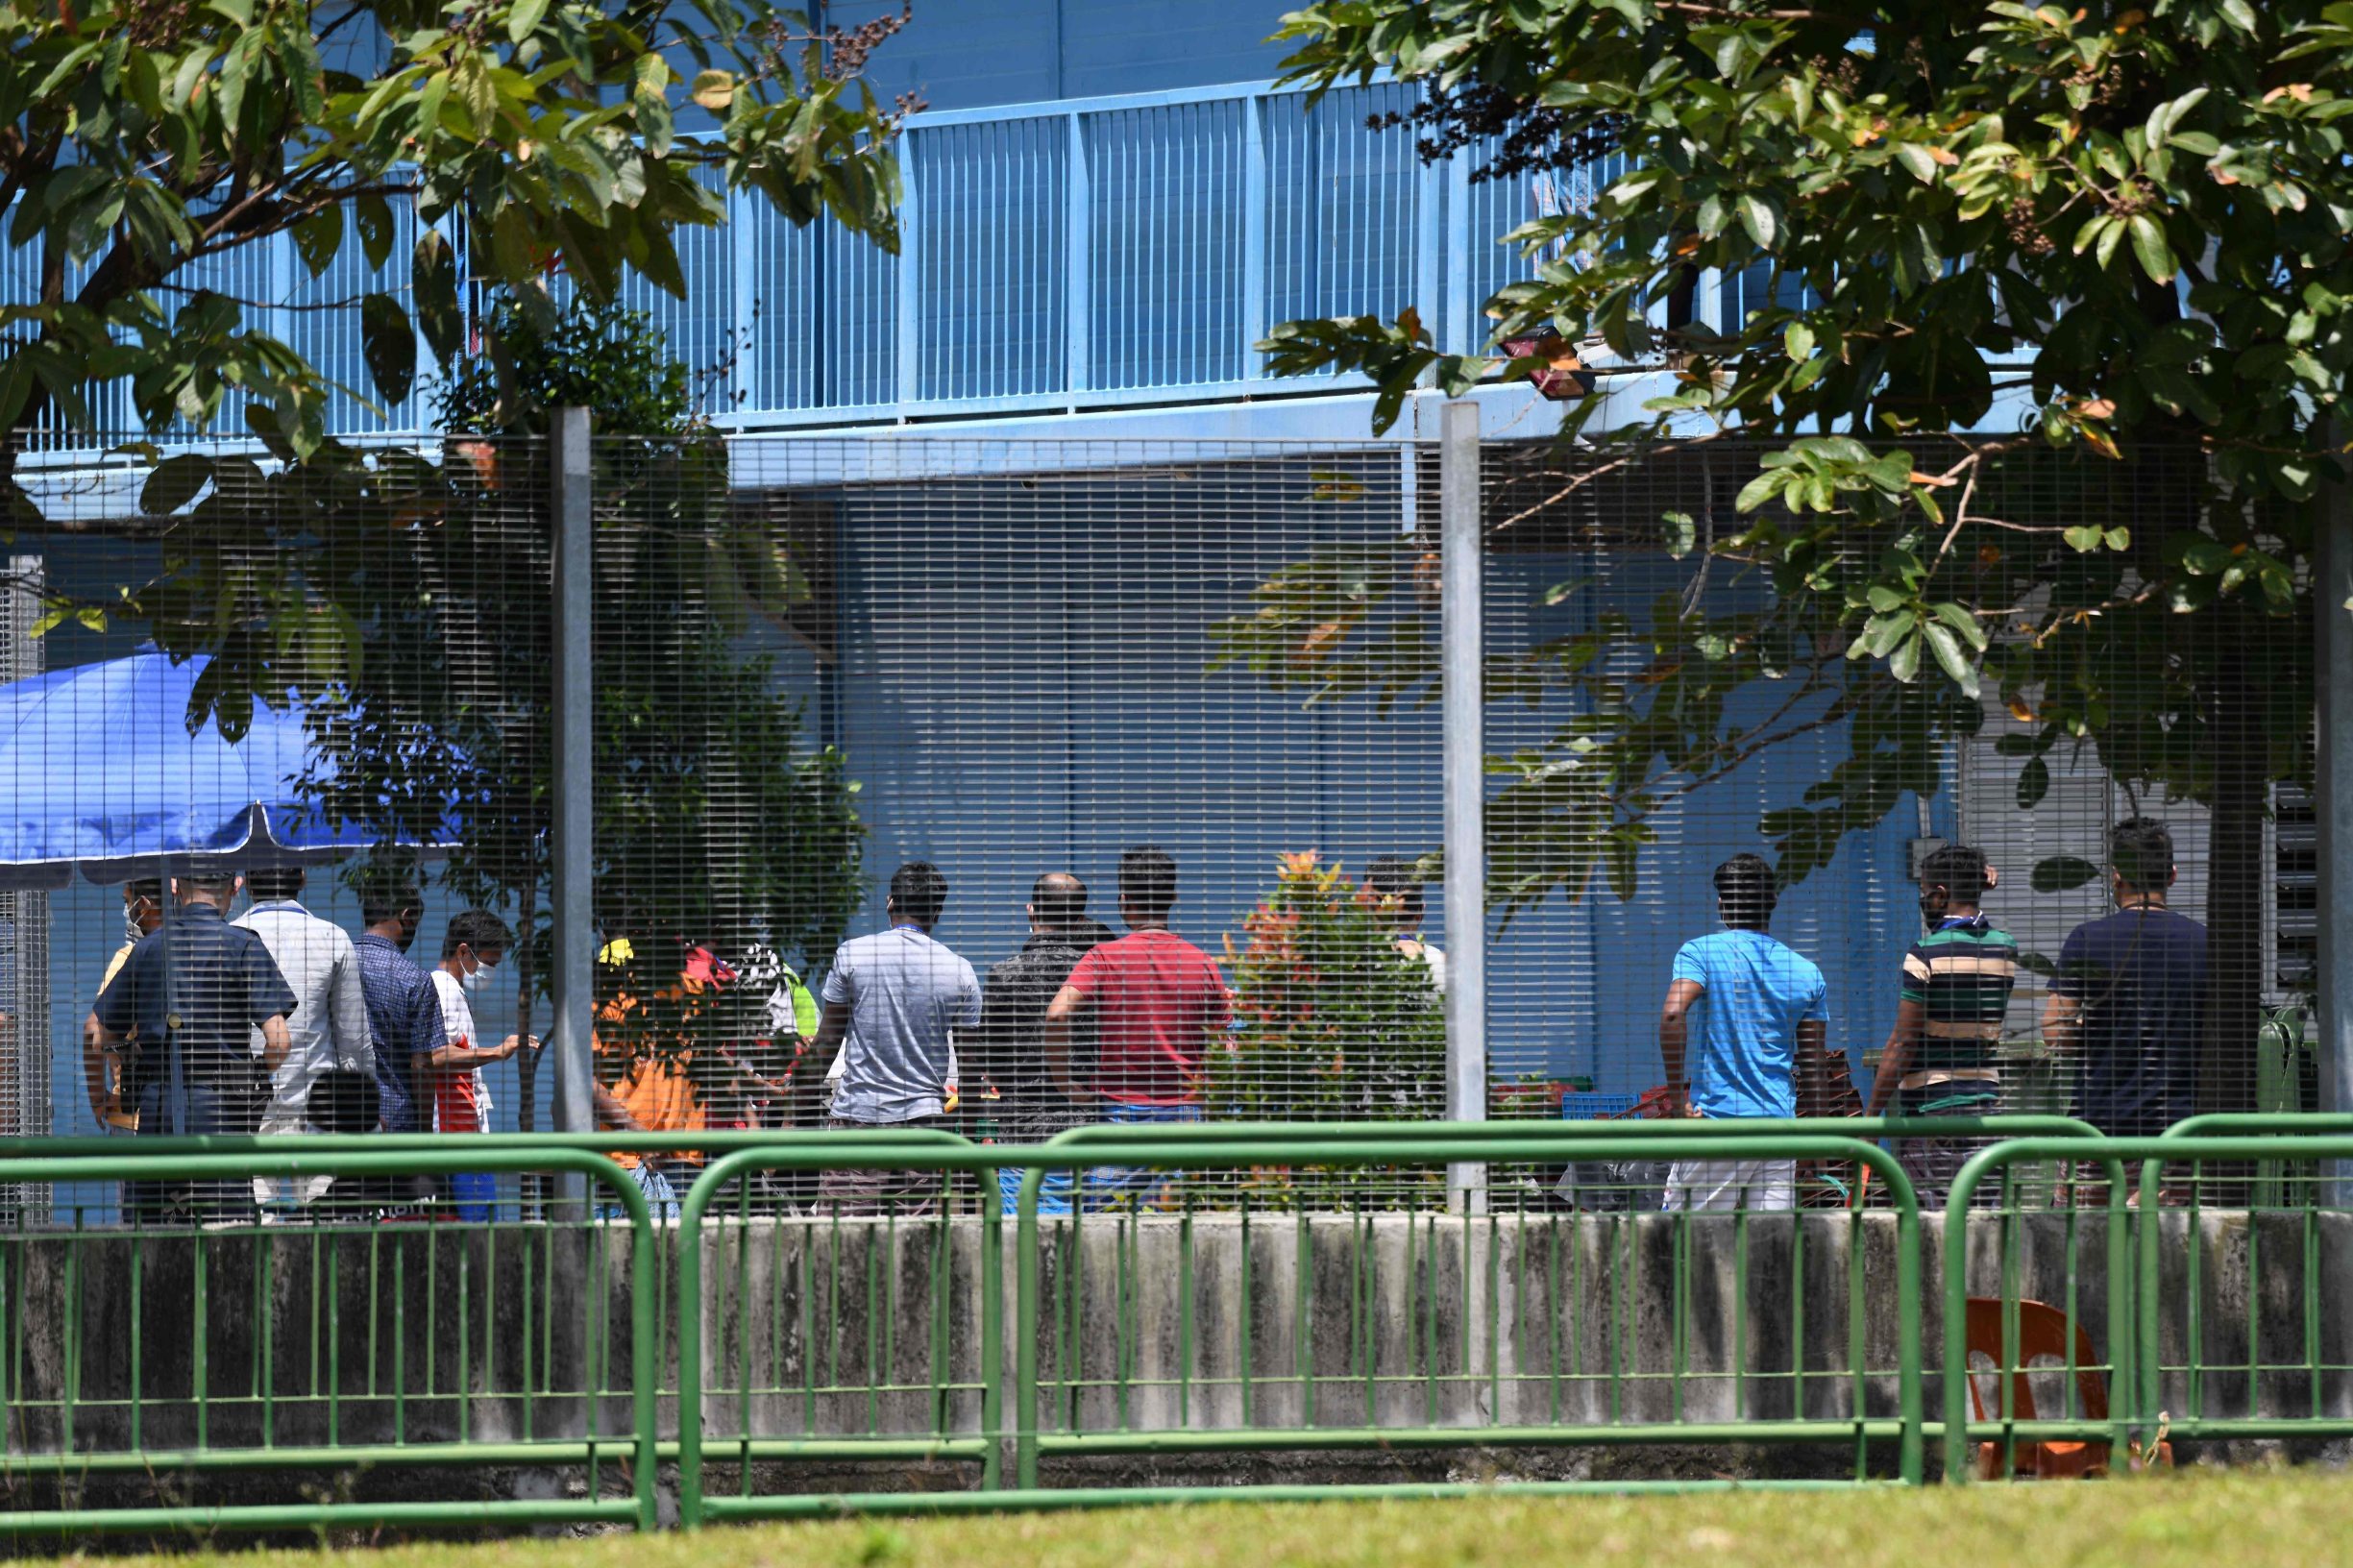 Residents queue for their food at Tuas South foreign workers dormitory that has been placed under government restriction as preventive measure against the spread of the COVID-19 coronavirus in Singapore on April 19, 2020. - Singapore imposed a mandatory stay-home order for migrant workers including in the construction sector for 14 days effective on April 20 due to coronavirus pandemic. (Photo by Roslan RAHMAN / AFP)